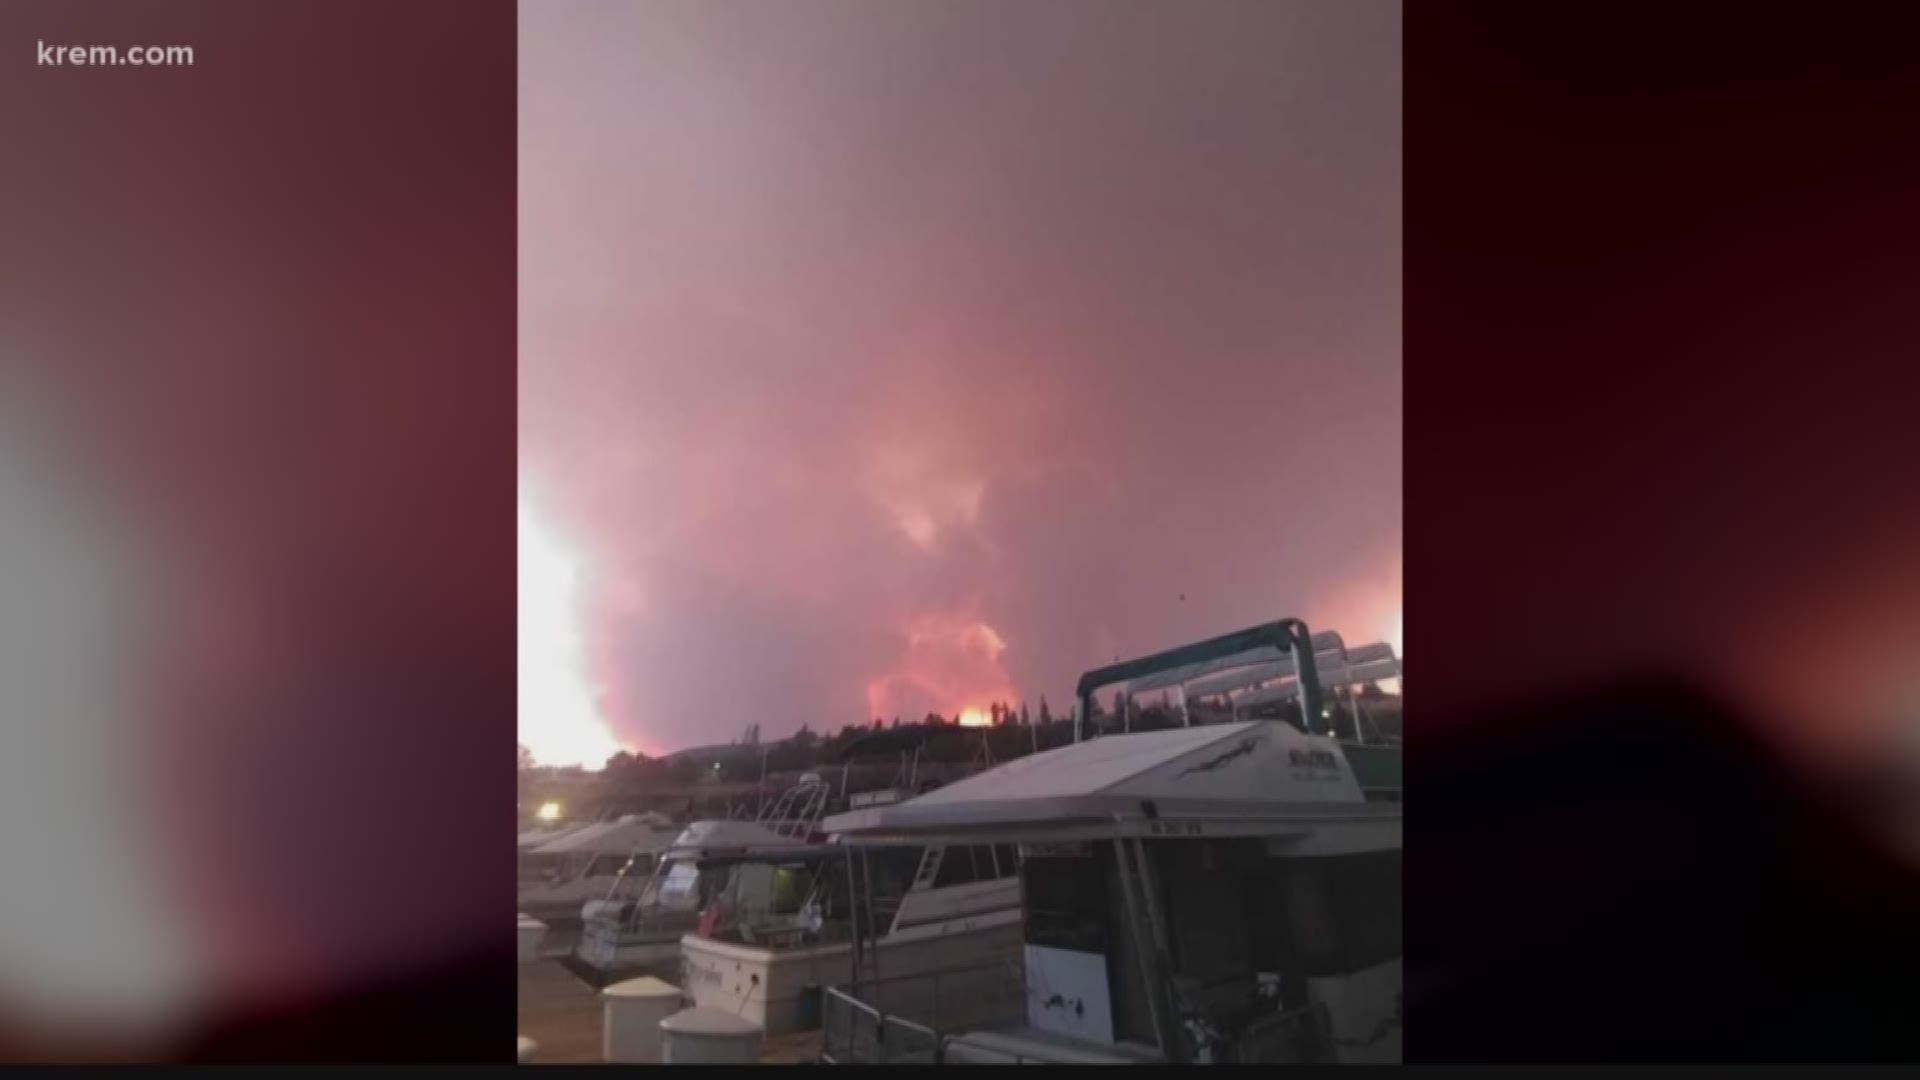 Fire officials say lightning sparked the Williams Flats Fire, which began burning on the Coville Reservation on Friday. KREM's Tim Pham spoke with those being asked to evacuate.